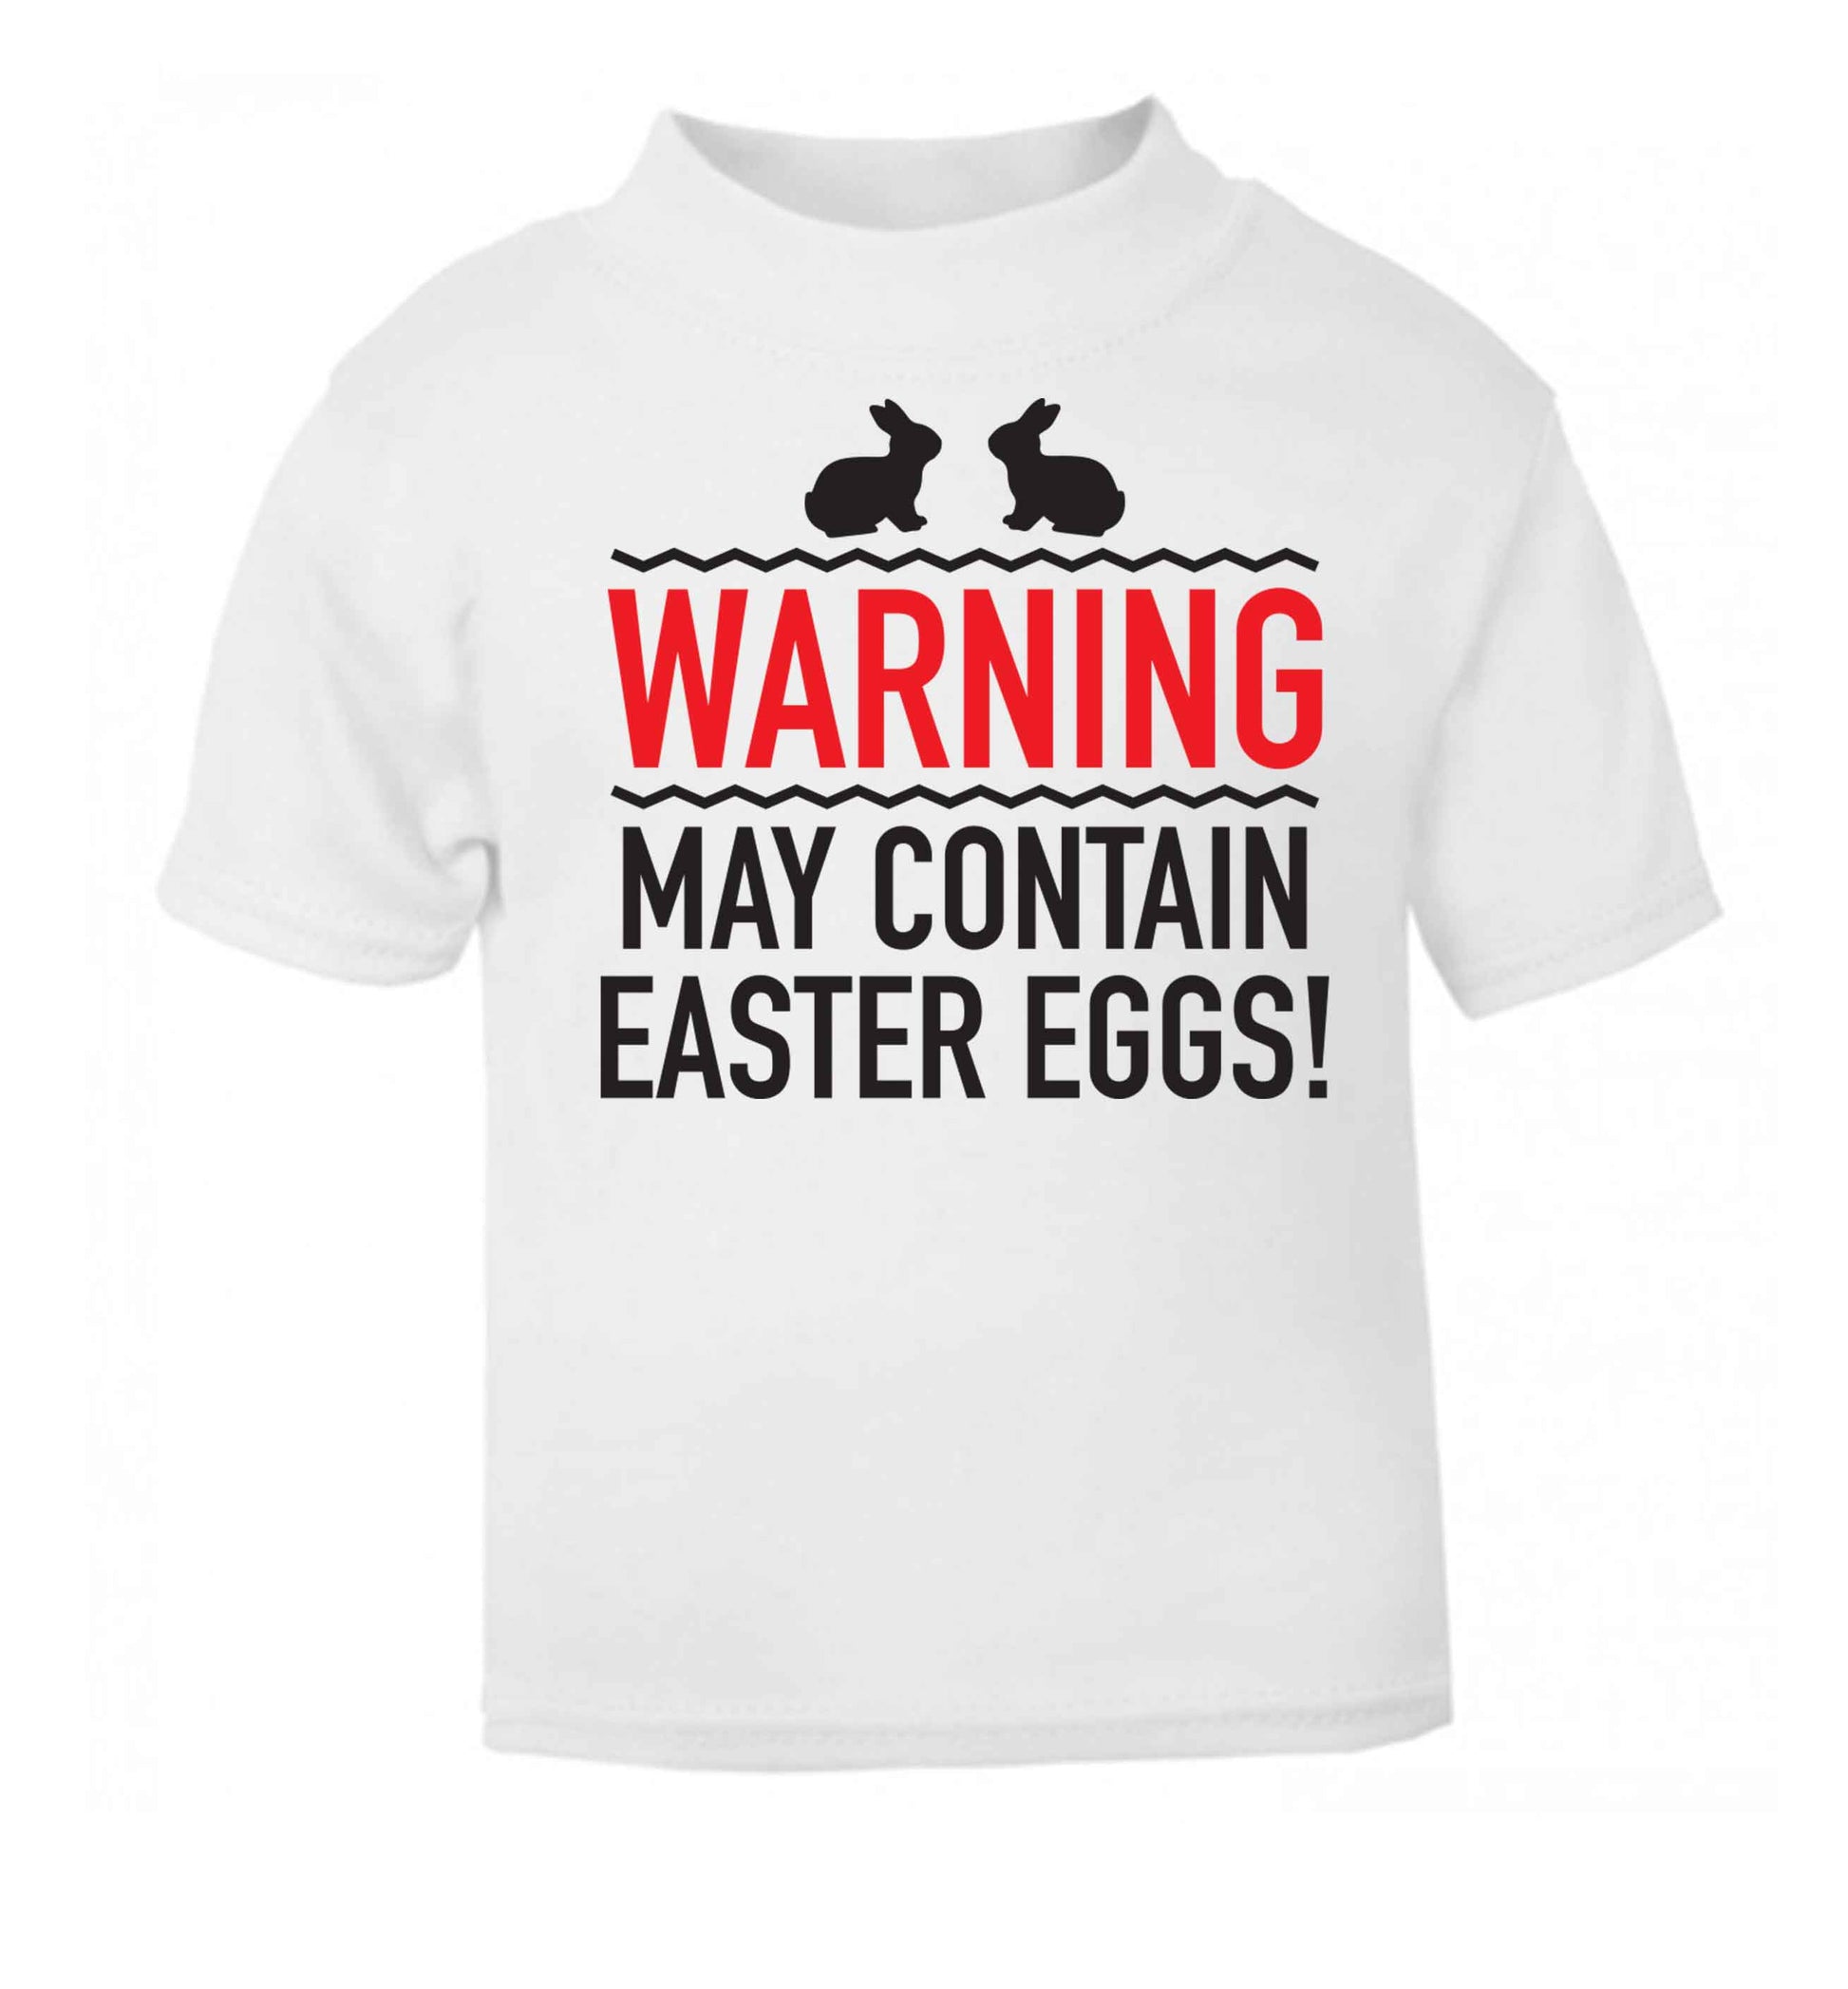 Warning may contain Easter eggs white baby toddler Tshirt 2 Years